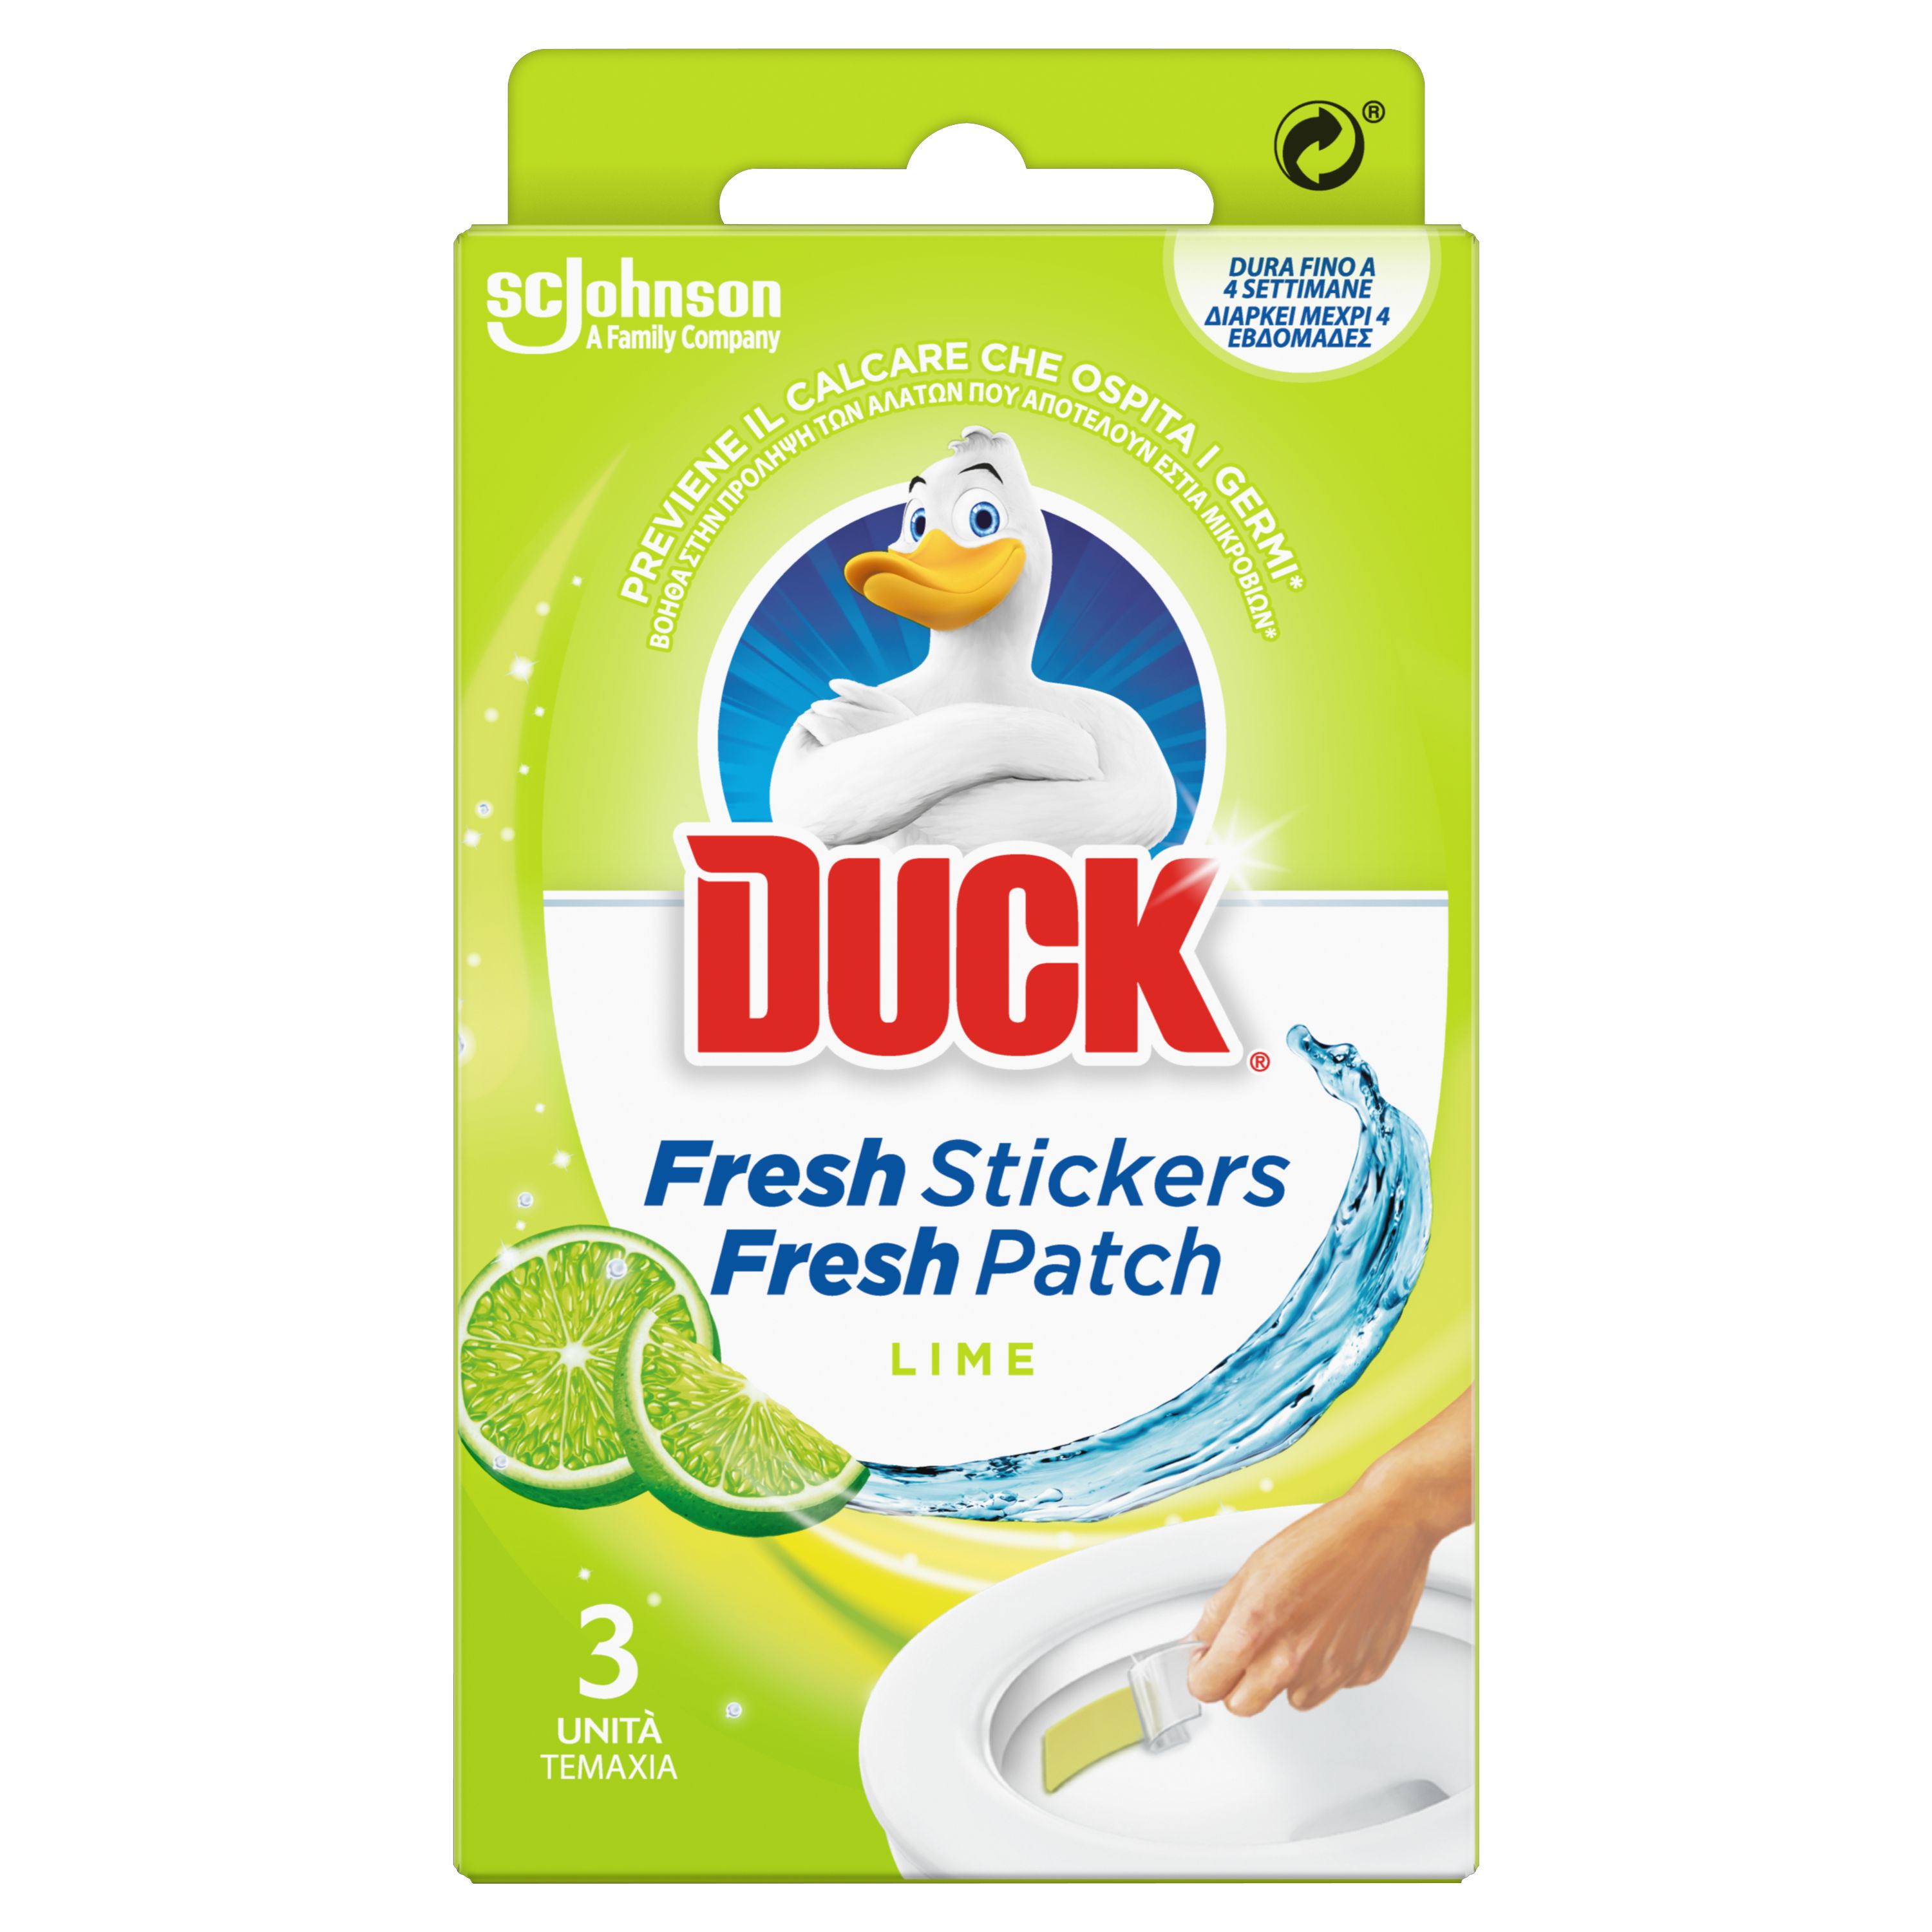 Duck® Fresh Stickers Lime